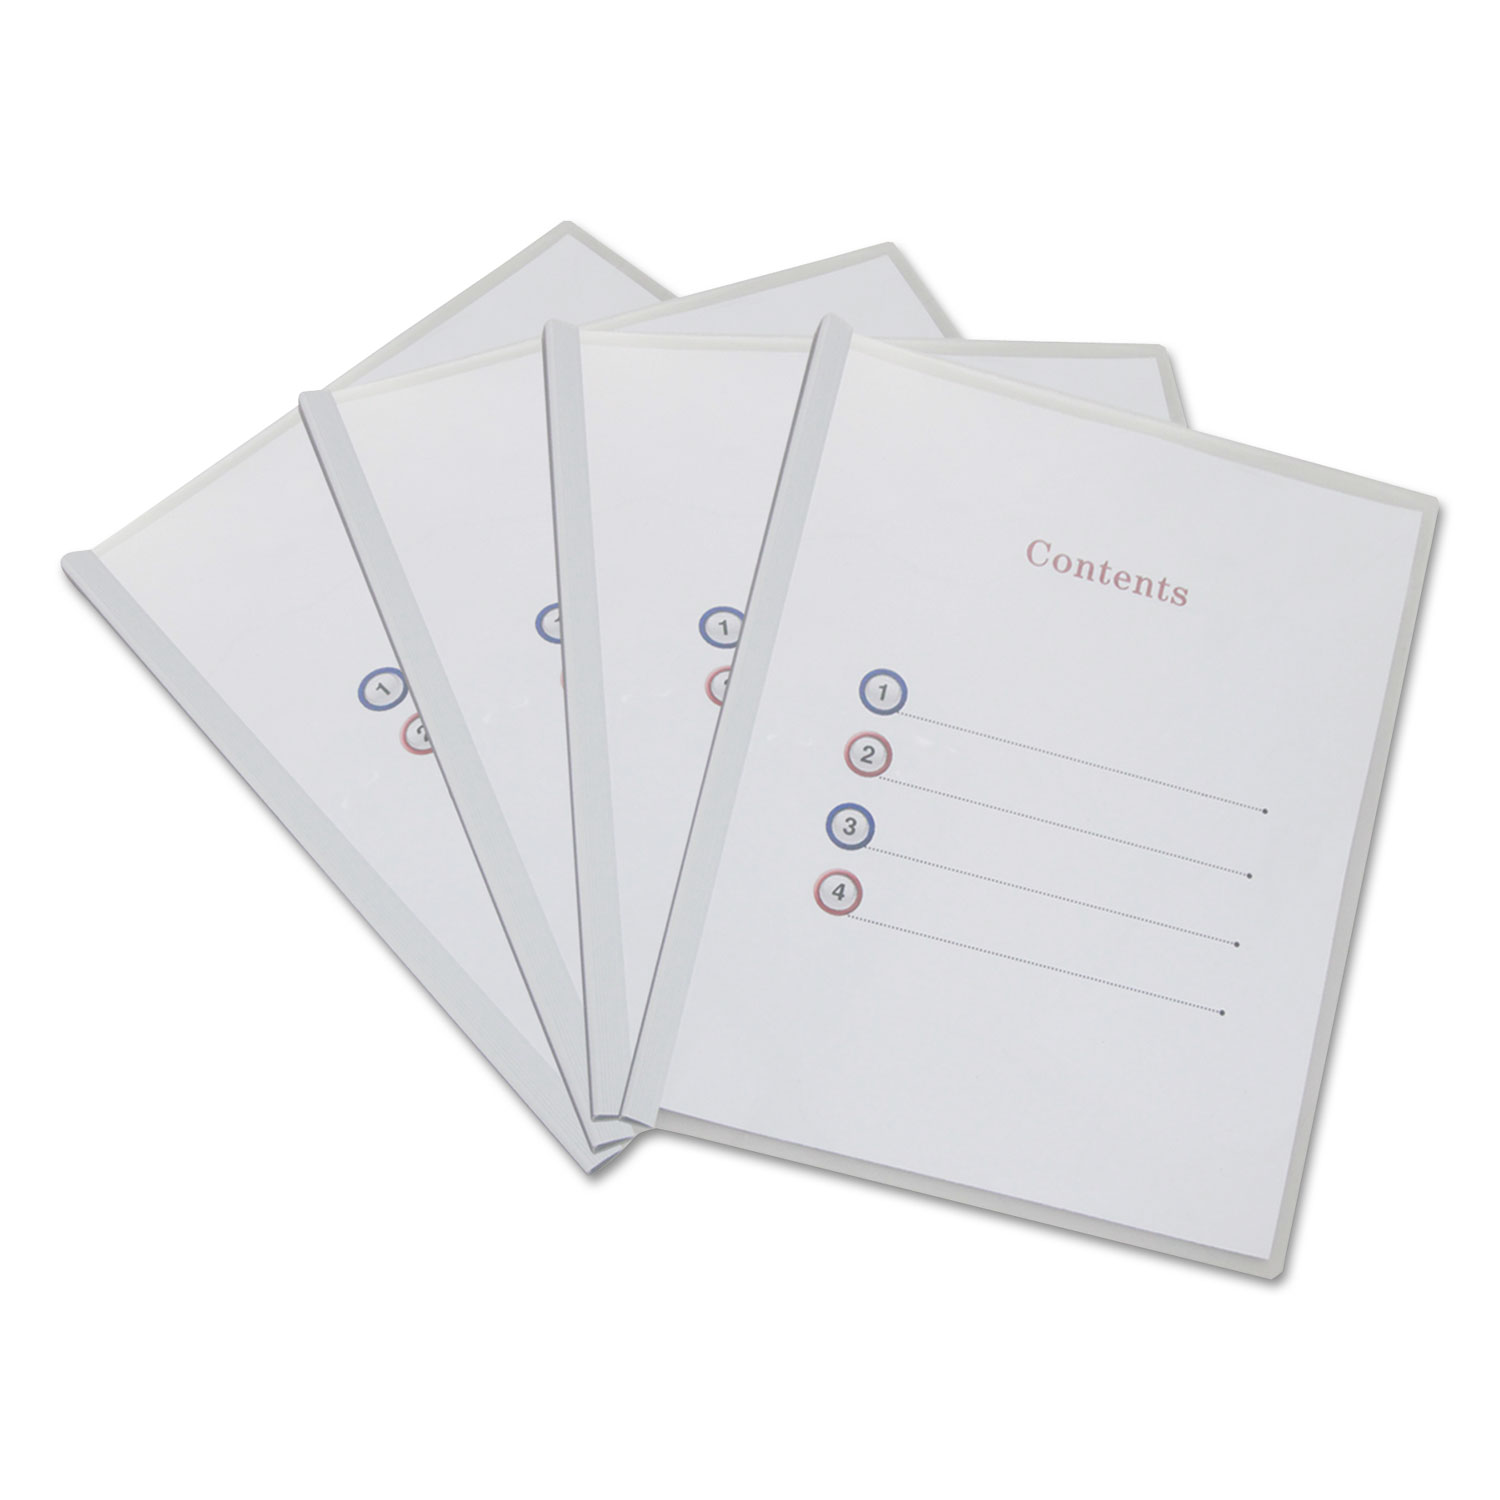  Universal UNV20564 Clear View Report Cover with Slide-on Binder Bar, 20 Sheets, White, 25 per pack (UNV20564) 